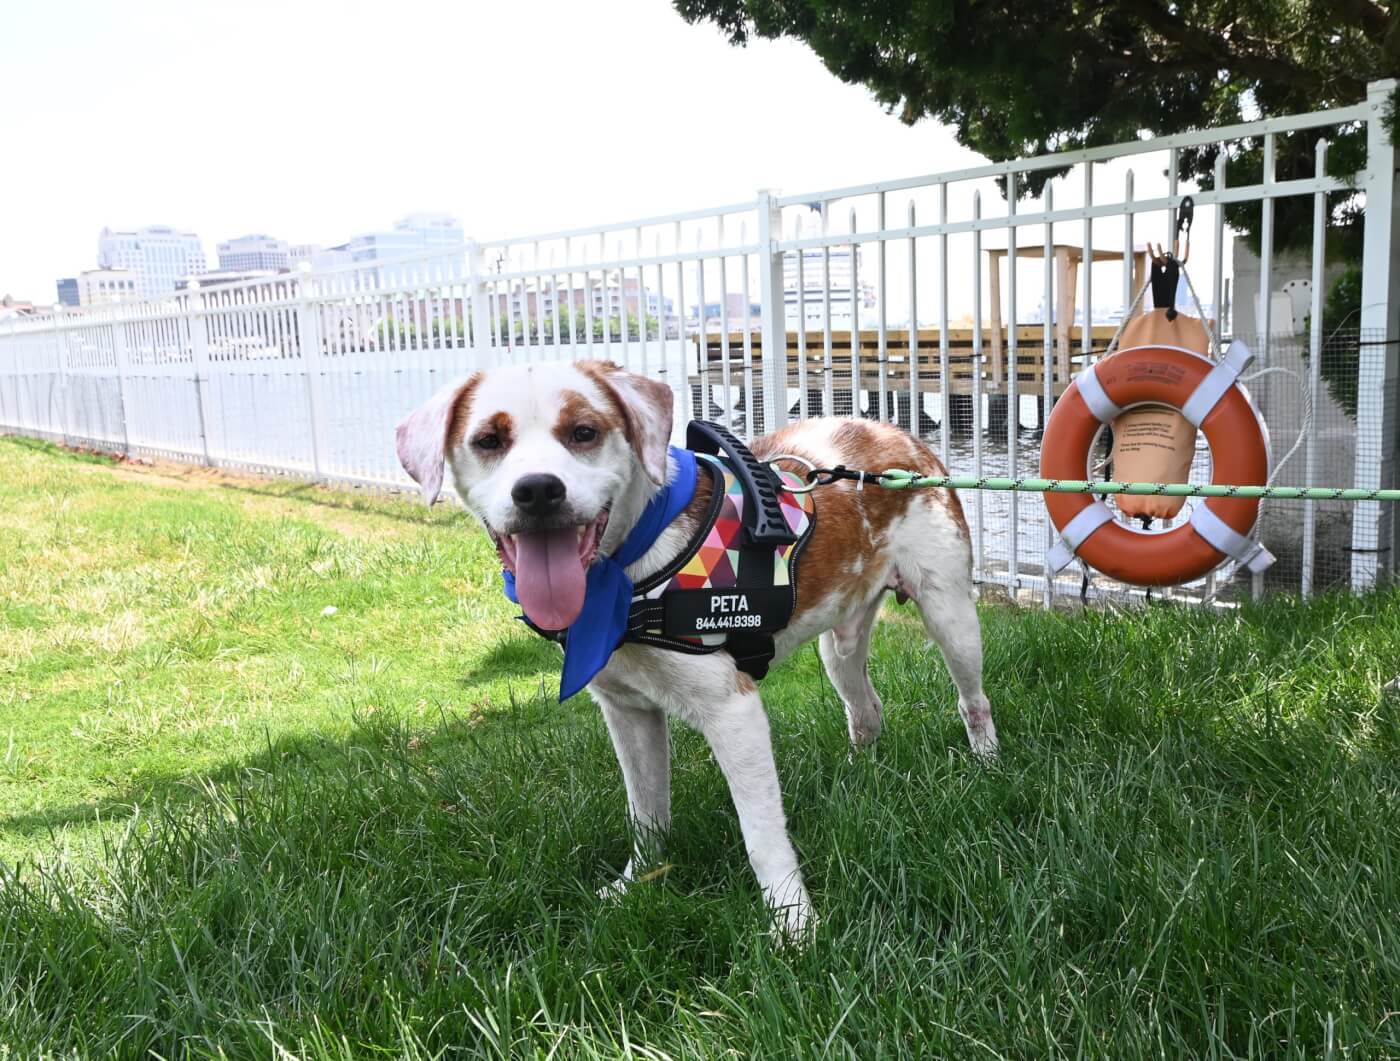 Dwight stands in front of a harbor in a harness and bright blue bandana